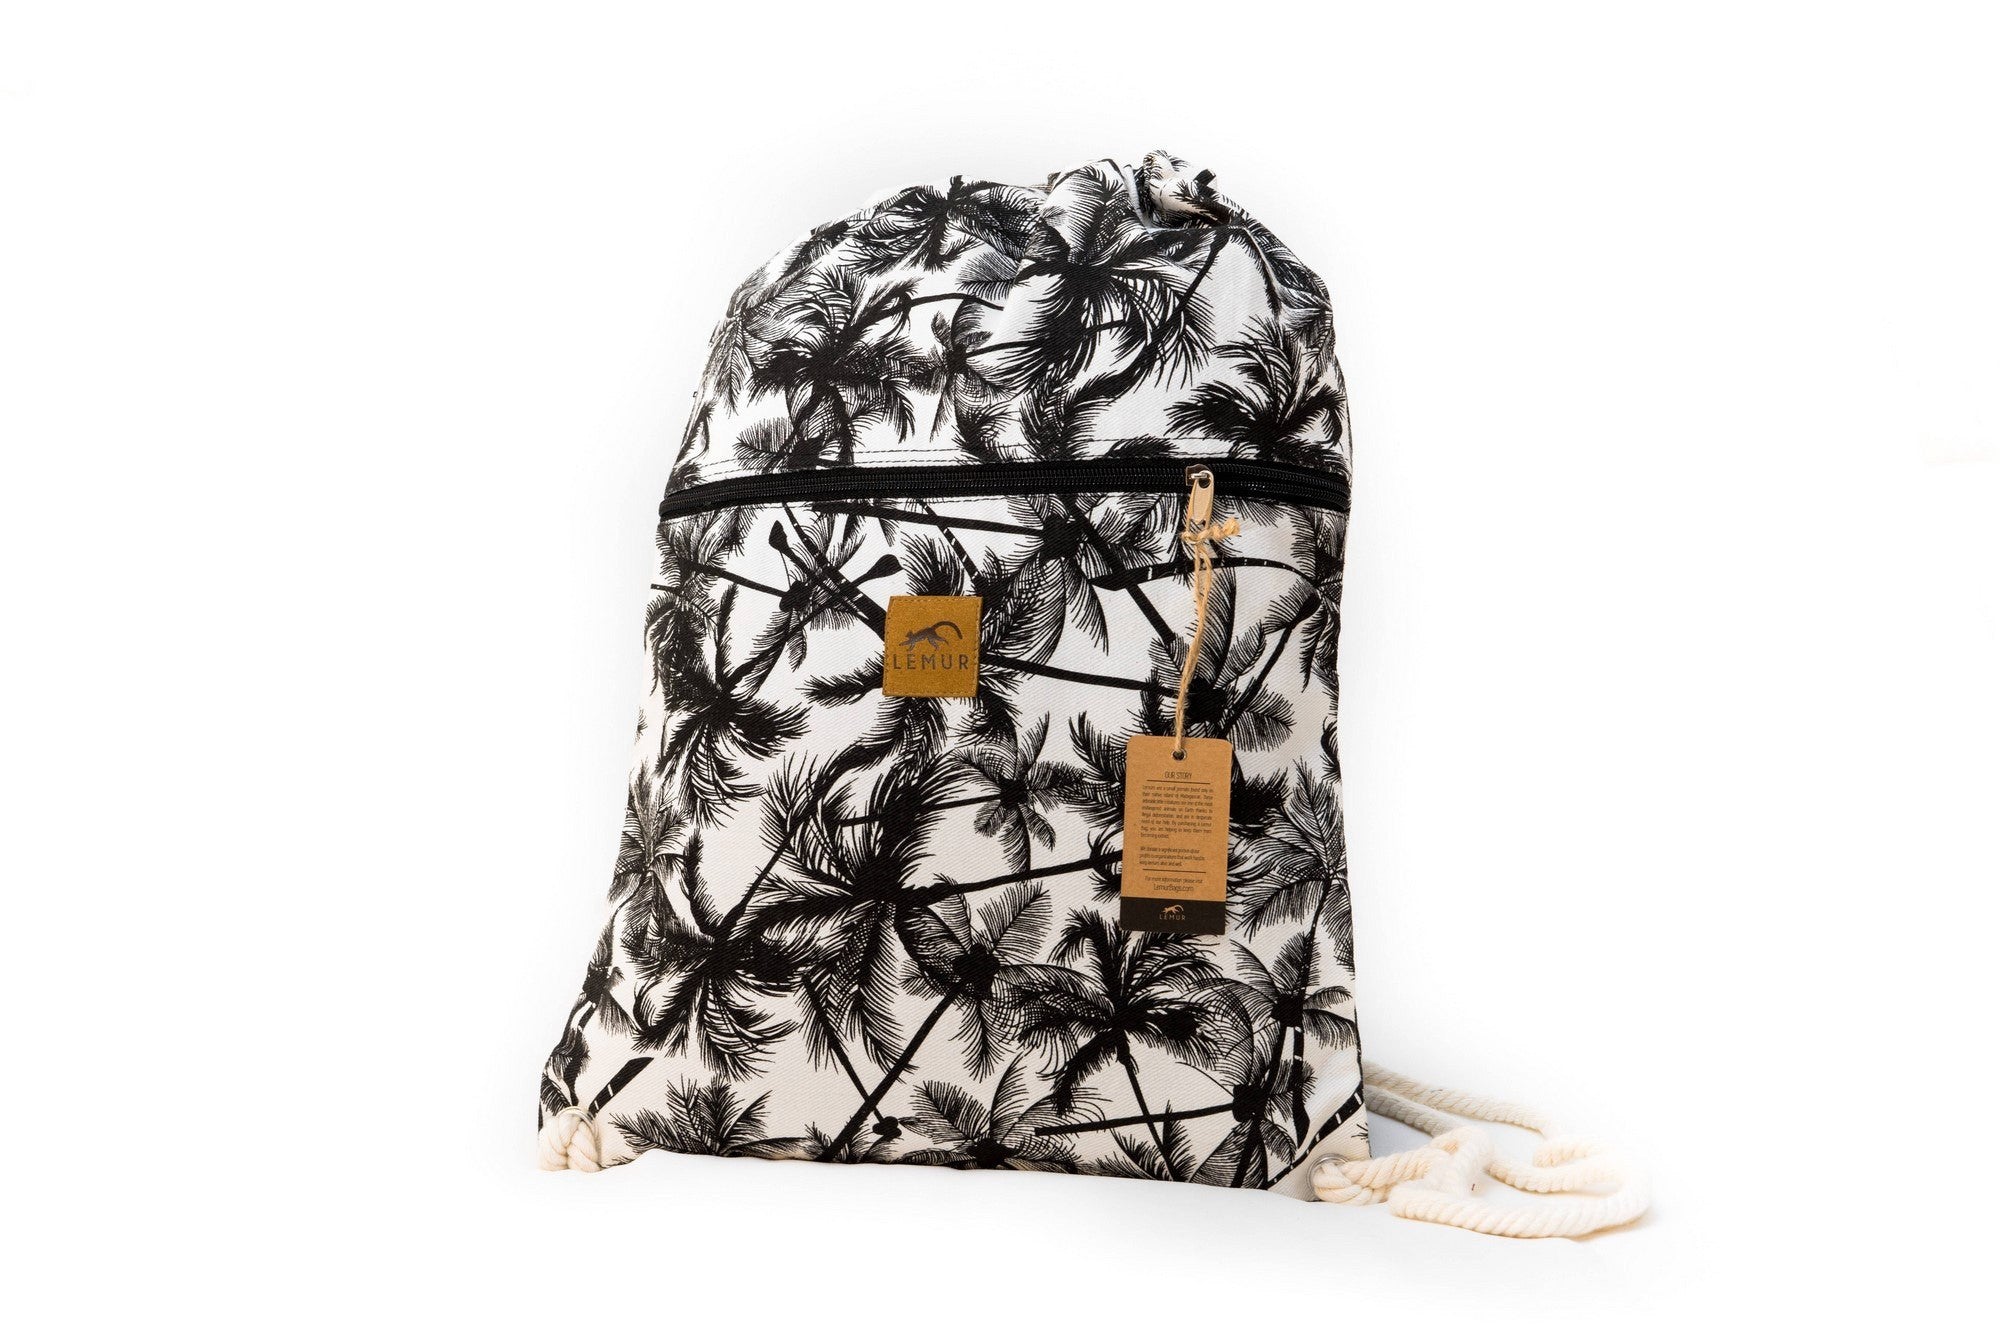 Drawstring Backpack - Drawstring Backpack - Canvas Cinch Daypack Sackpack By Lemur Bags (Tropical Palm)